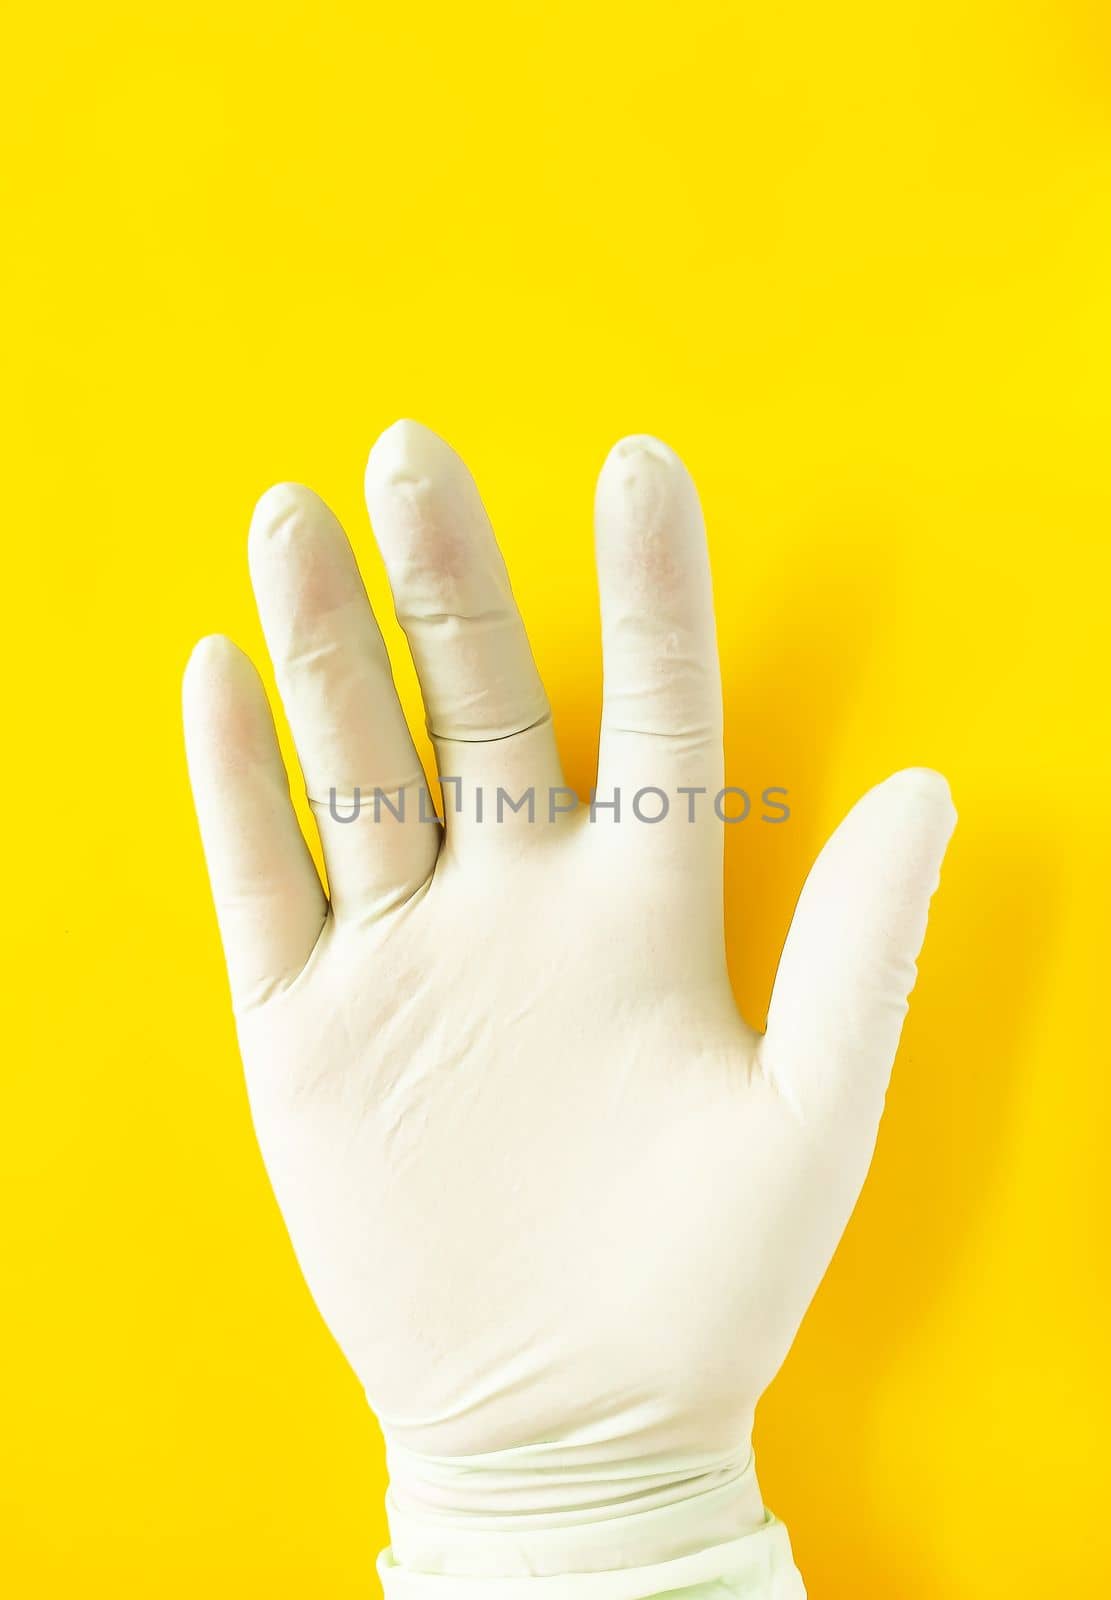 A hand in rubber glove by nightlyviolet